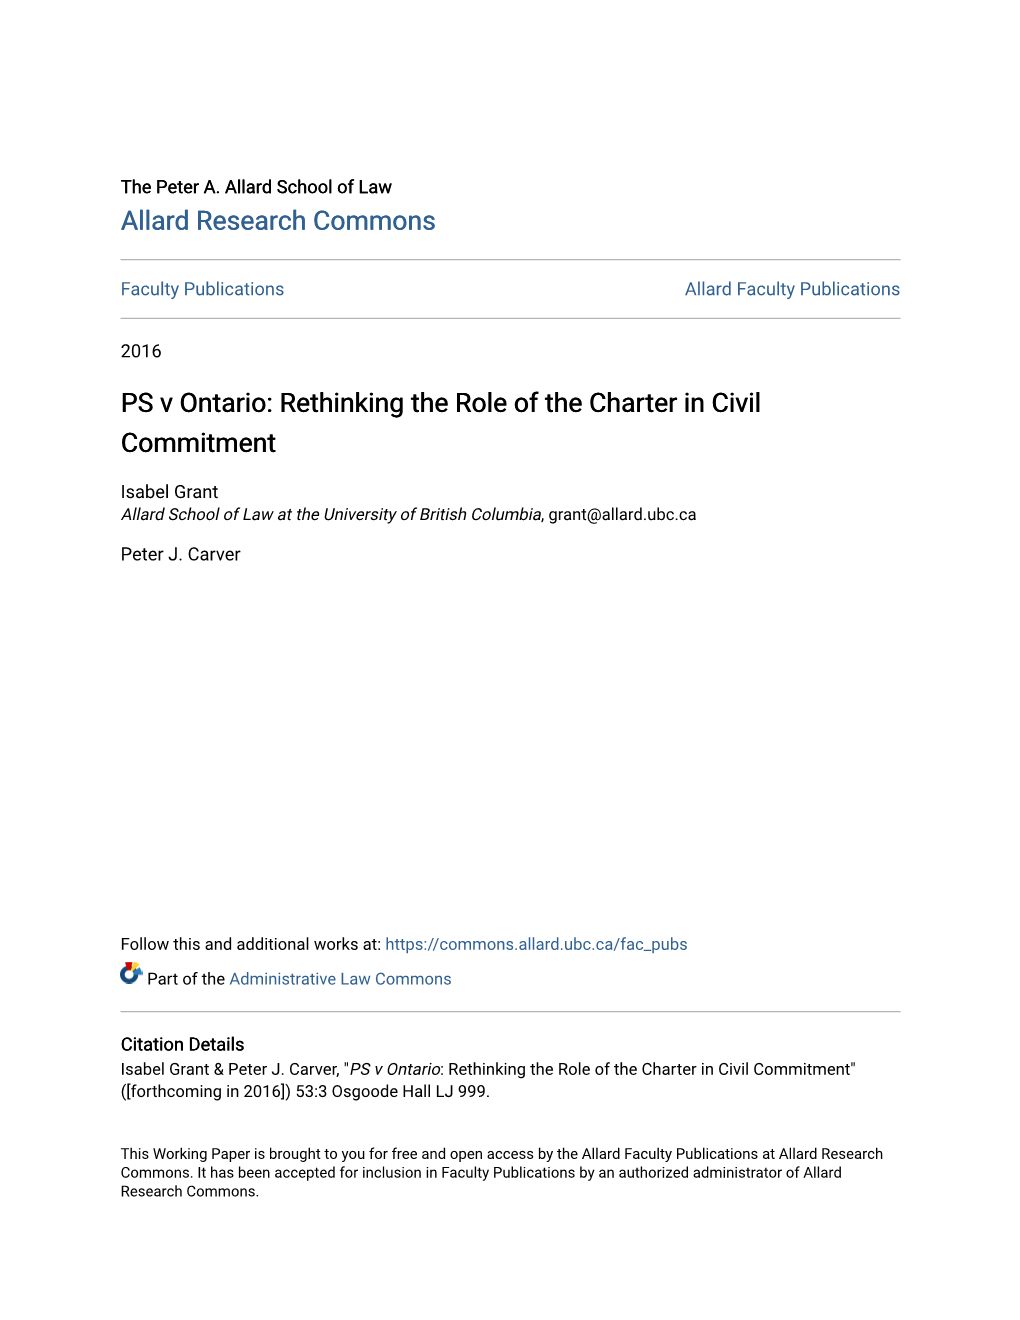 PS V Ontario: Rethinking the Role of the Charter in Civil Commitment